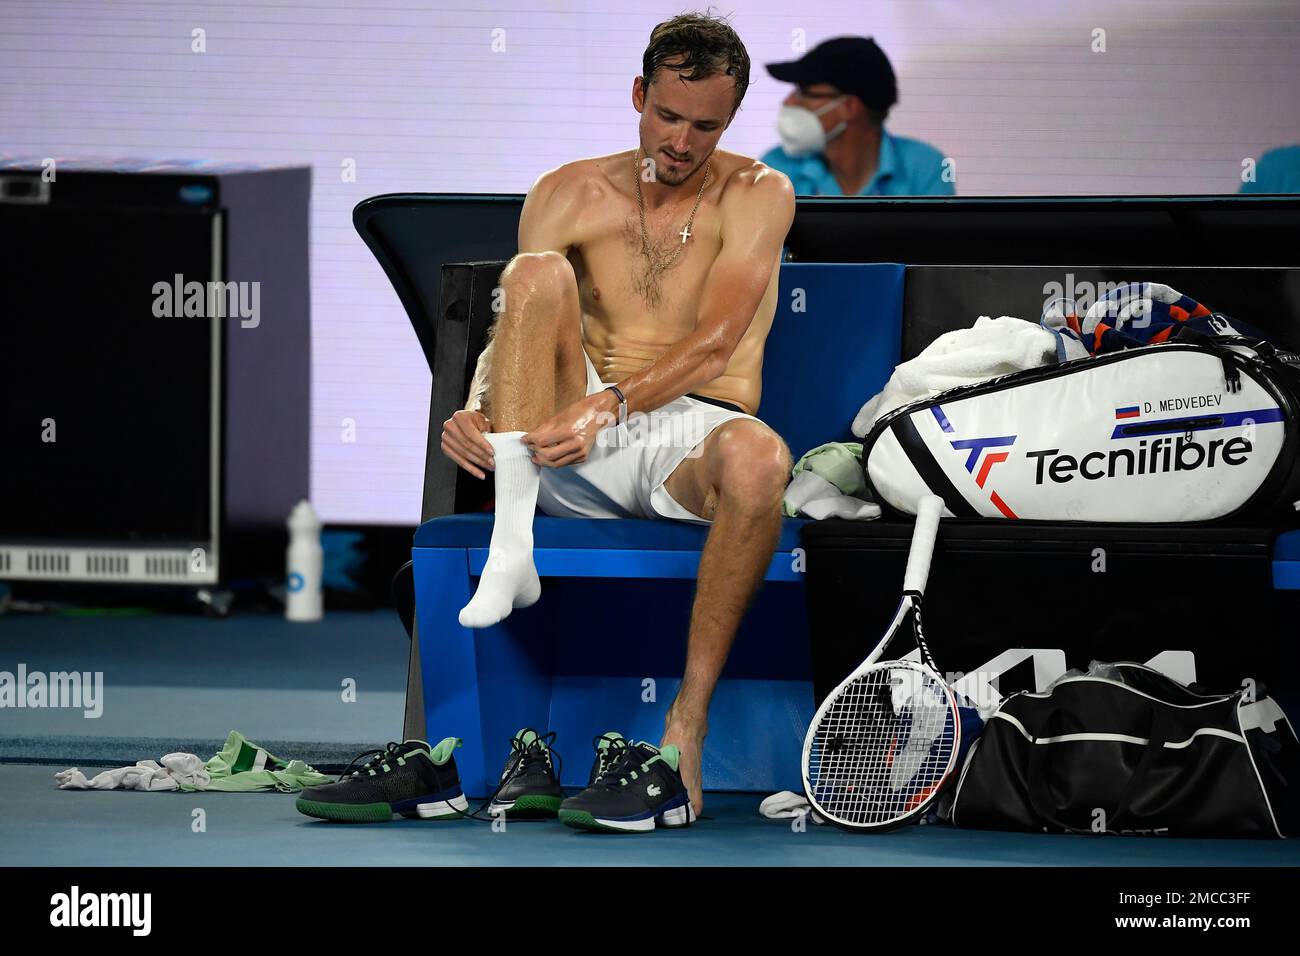 Daniil Medvedev of Russia changes his shirt and socks during his quarterfinal against Felix Auger-Aliassime of Canada at the Australian Open tennis championships in Melbourne, Australia, Wednesday, Jan